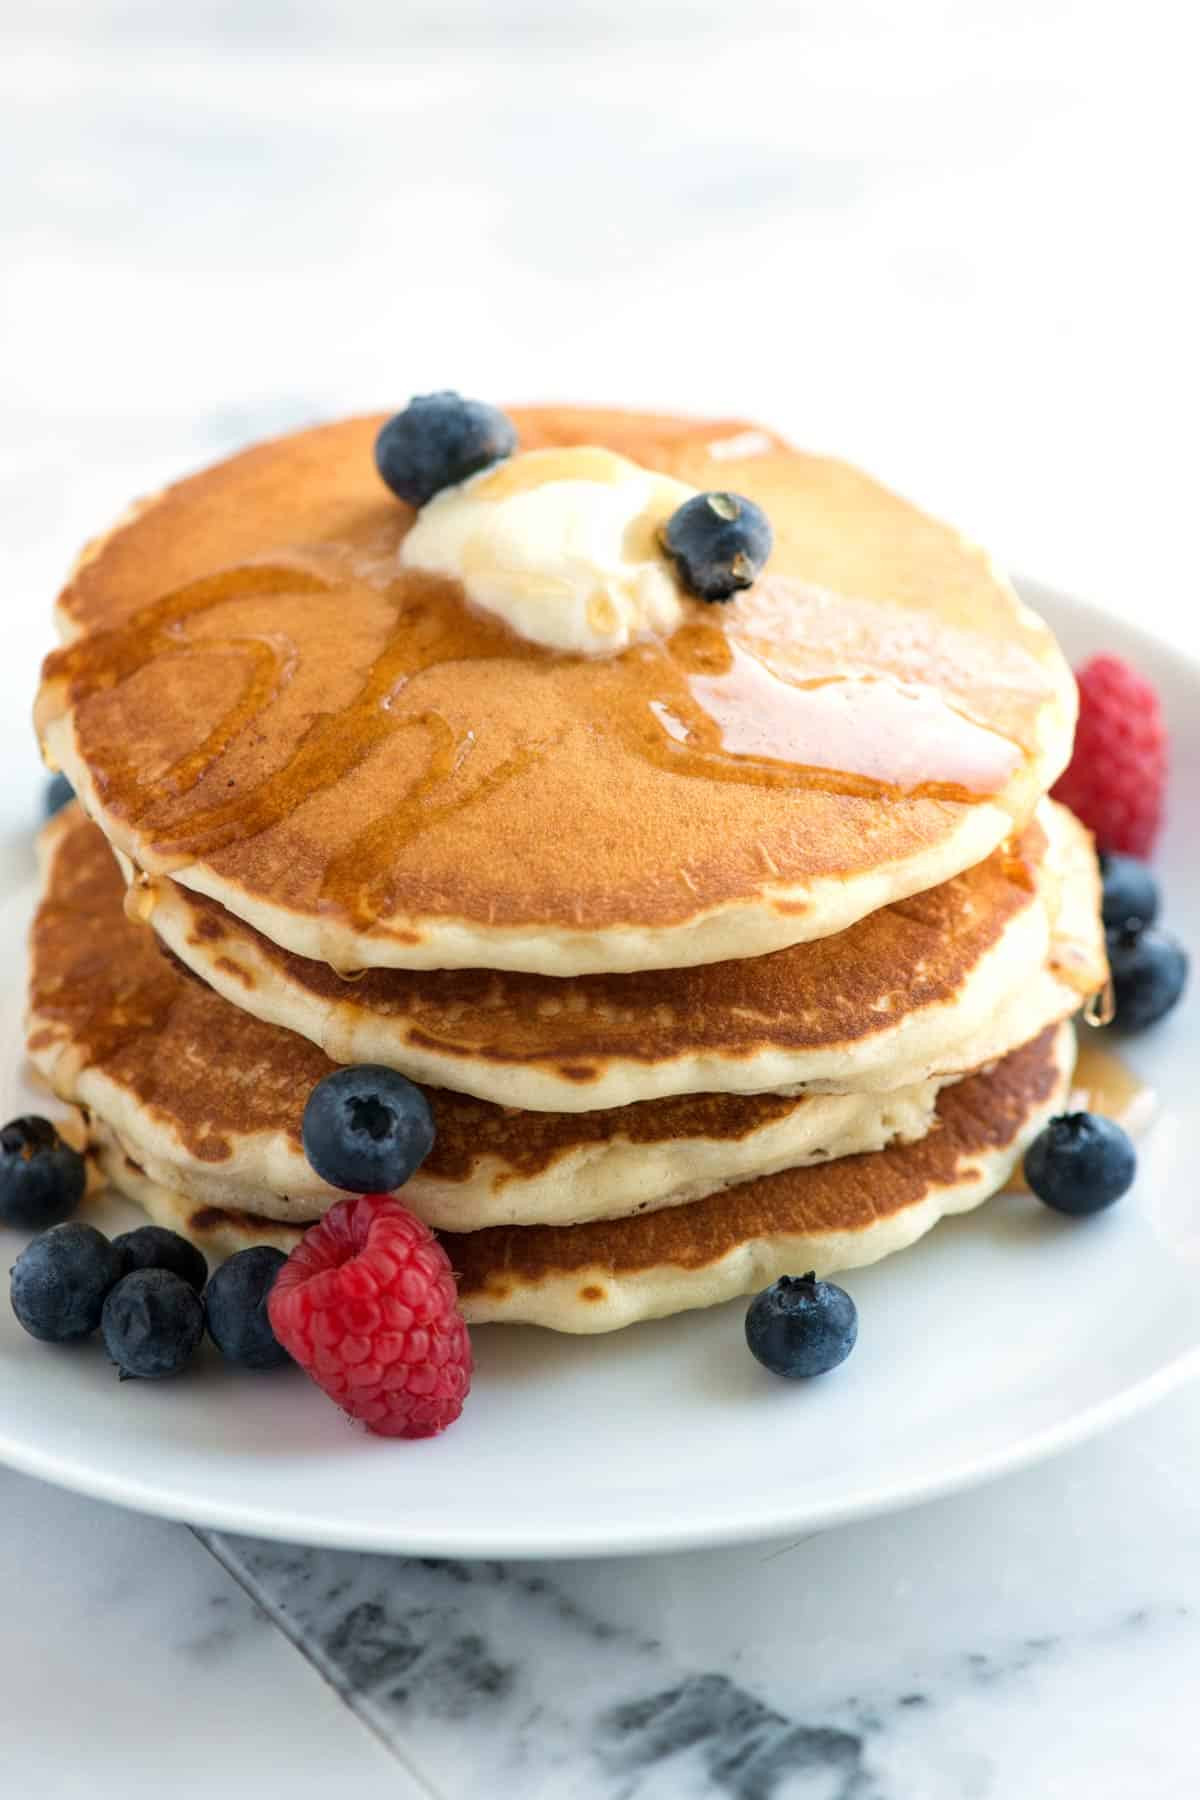 How To Make Pancakes Fluffy
 Easy Fluffy Pancakes Recipe from Scratch